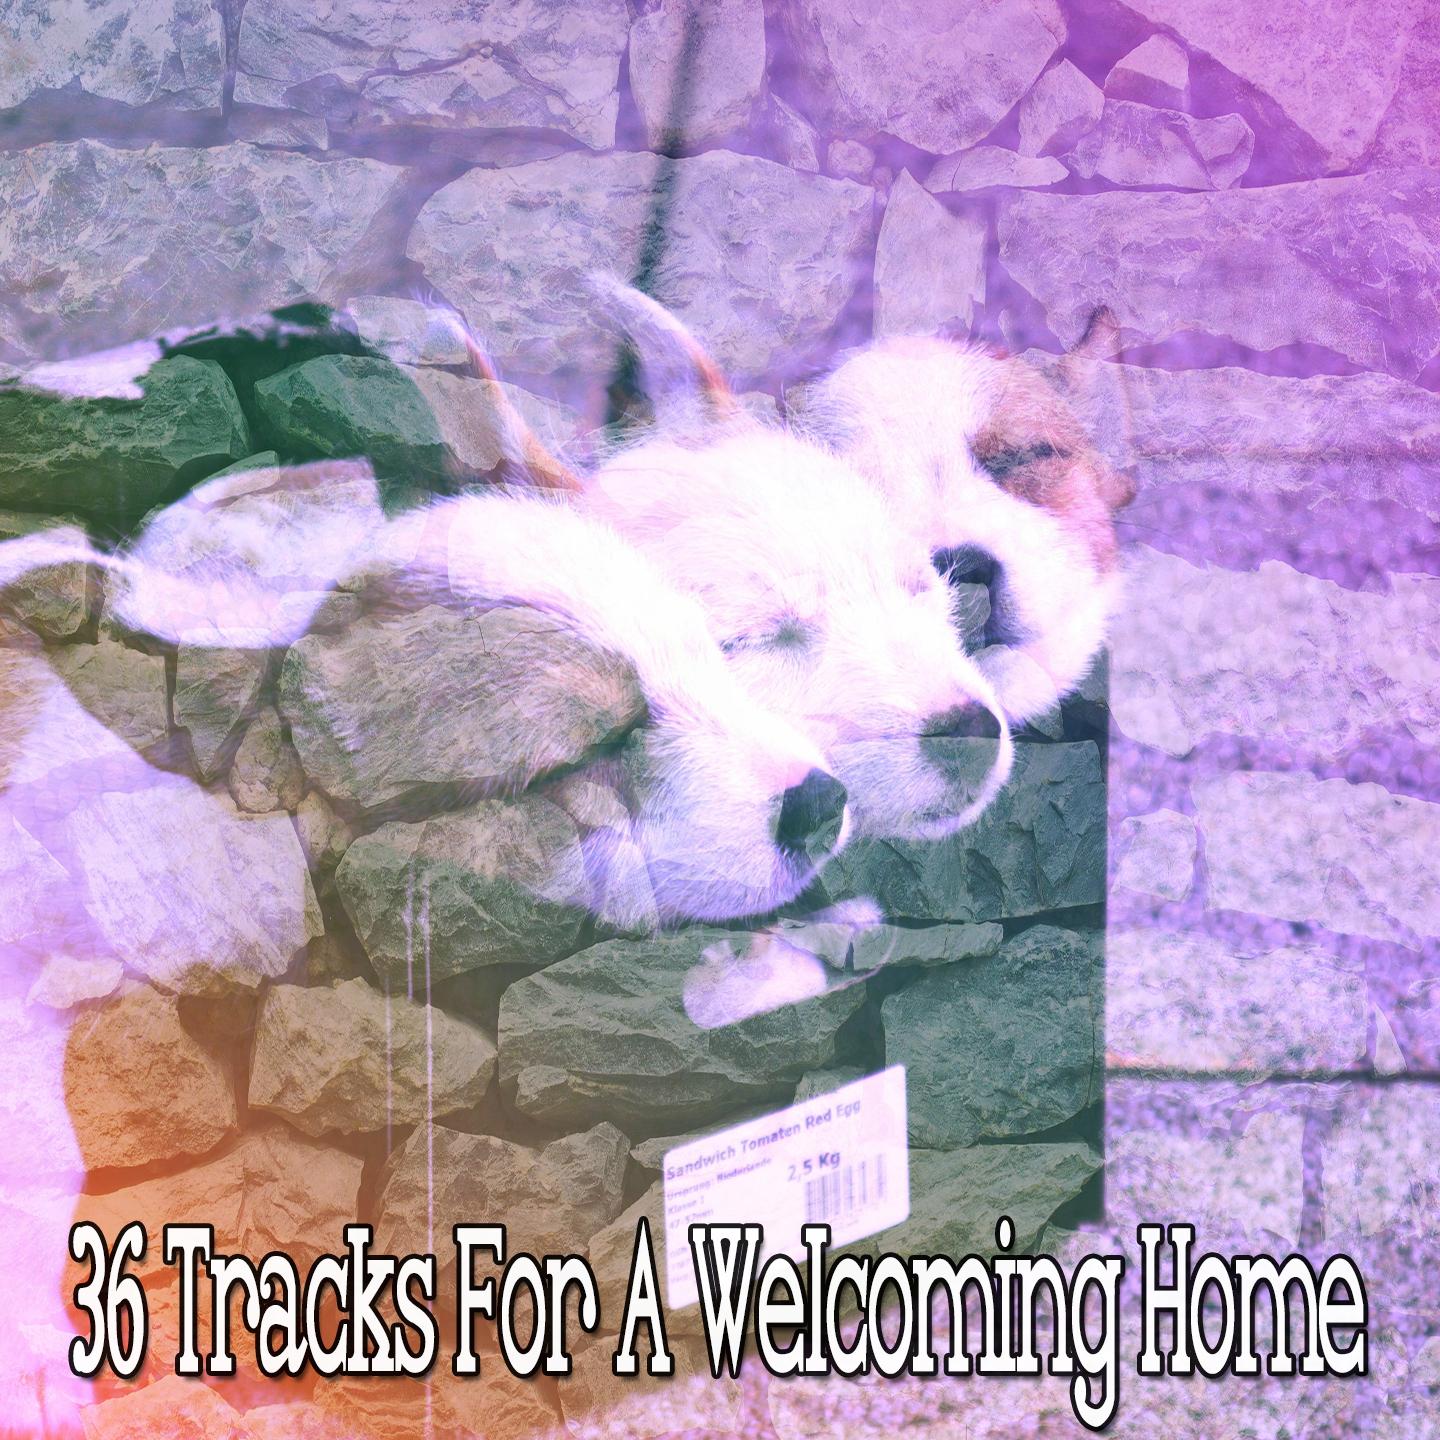 36 Tracks For A Welcoming Home